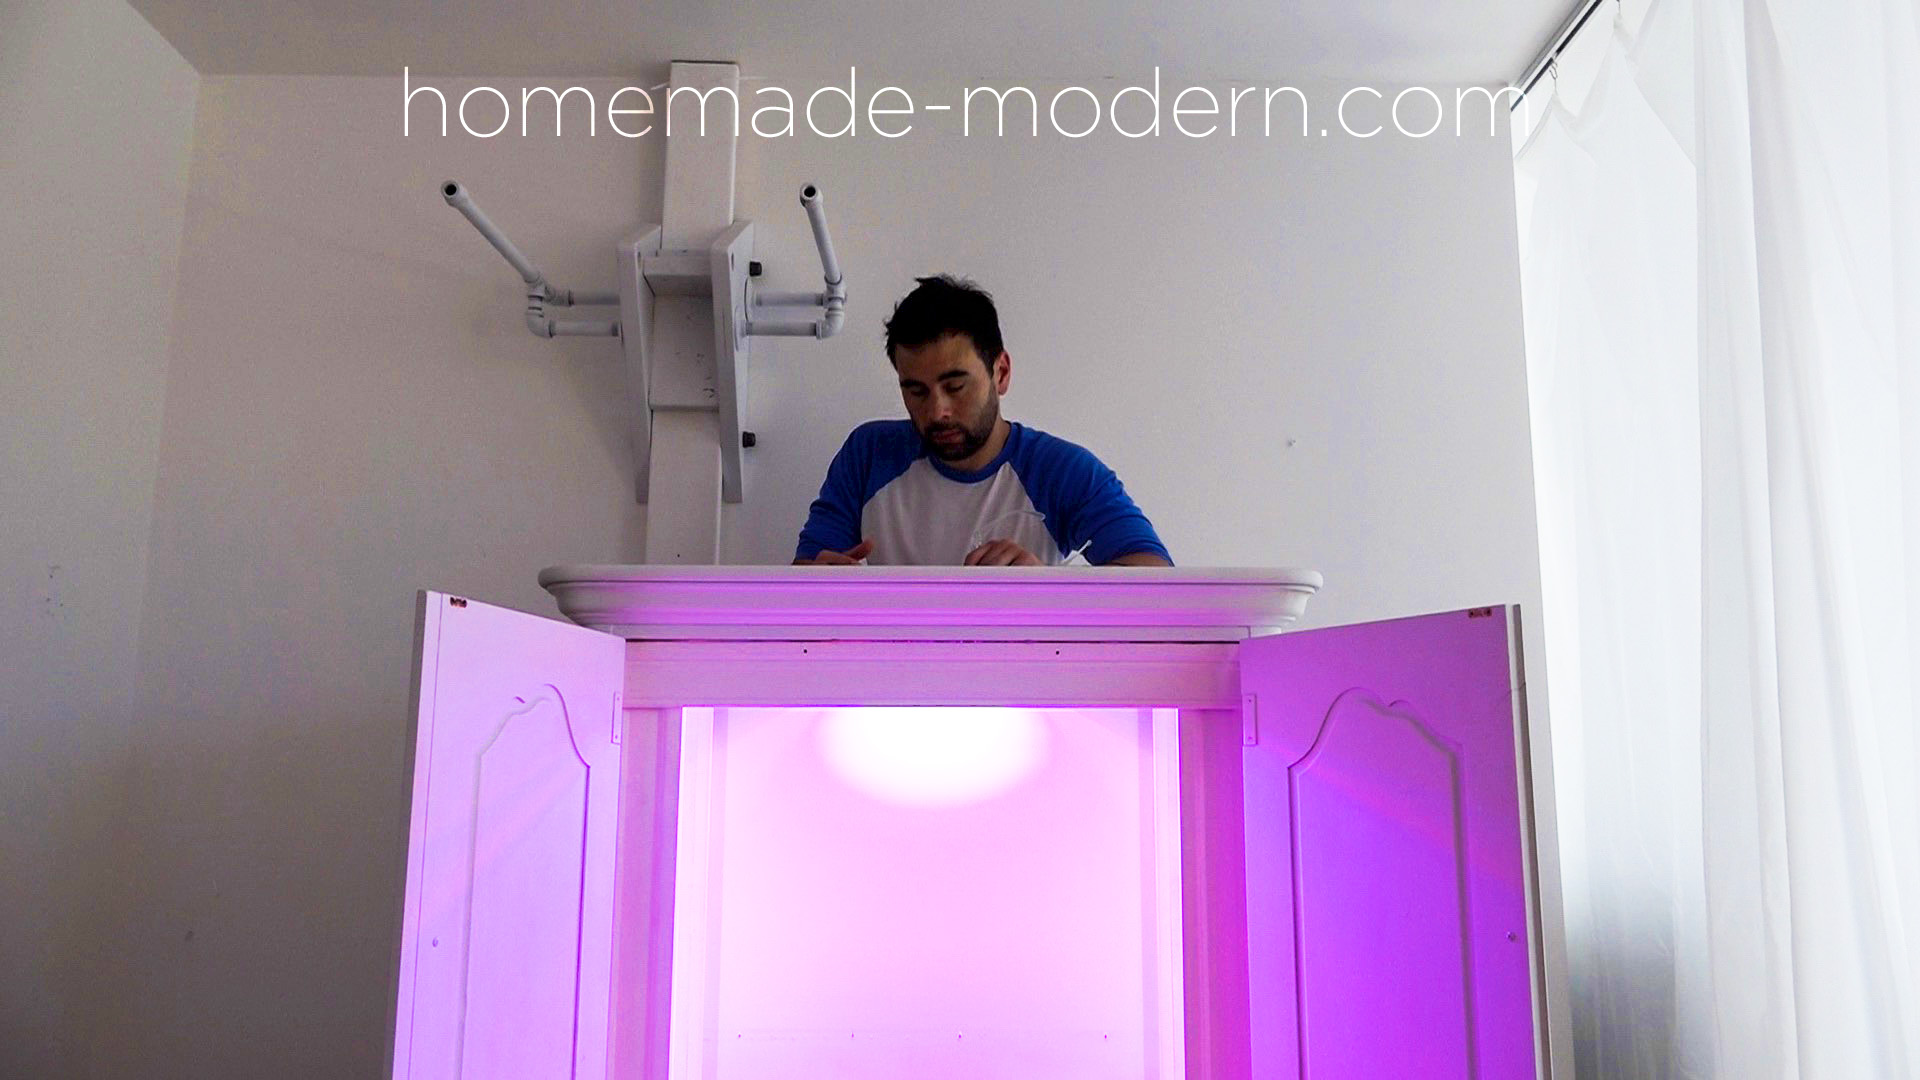 This writing desk was built inside of a wardrobe and has LED grow lights that provide light for real the real plants growing inside. This is one of Ben Uyeda workspace projects where he explores ideas of how to foster creativity during repetitive tasks. For more information go to HomeMade-Modern.com